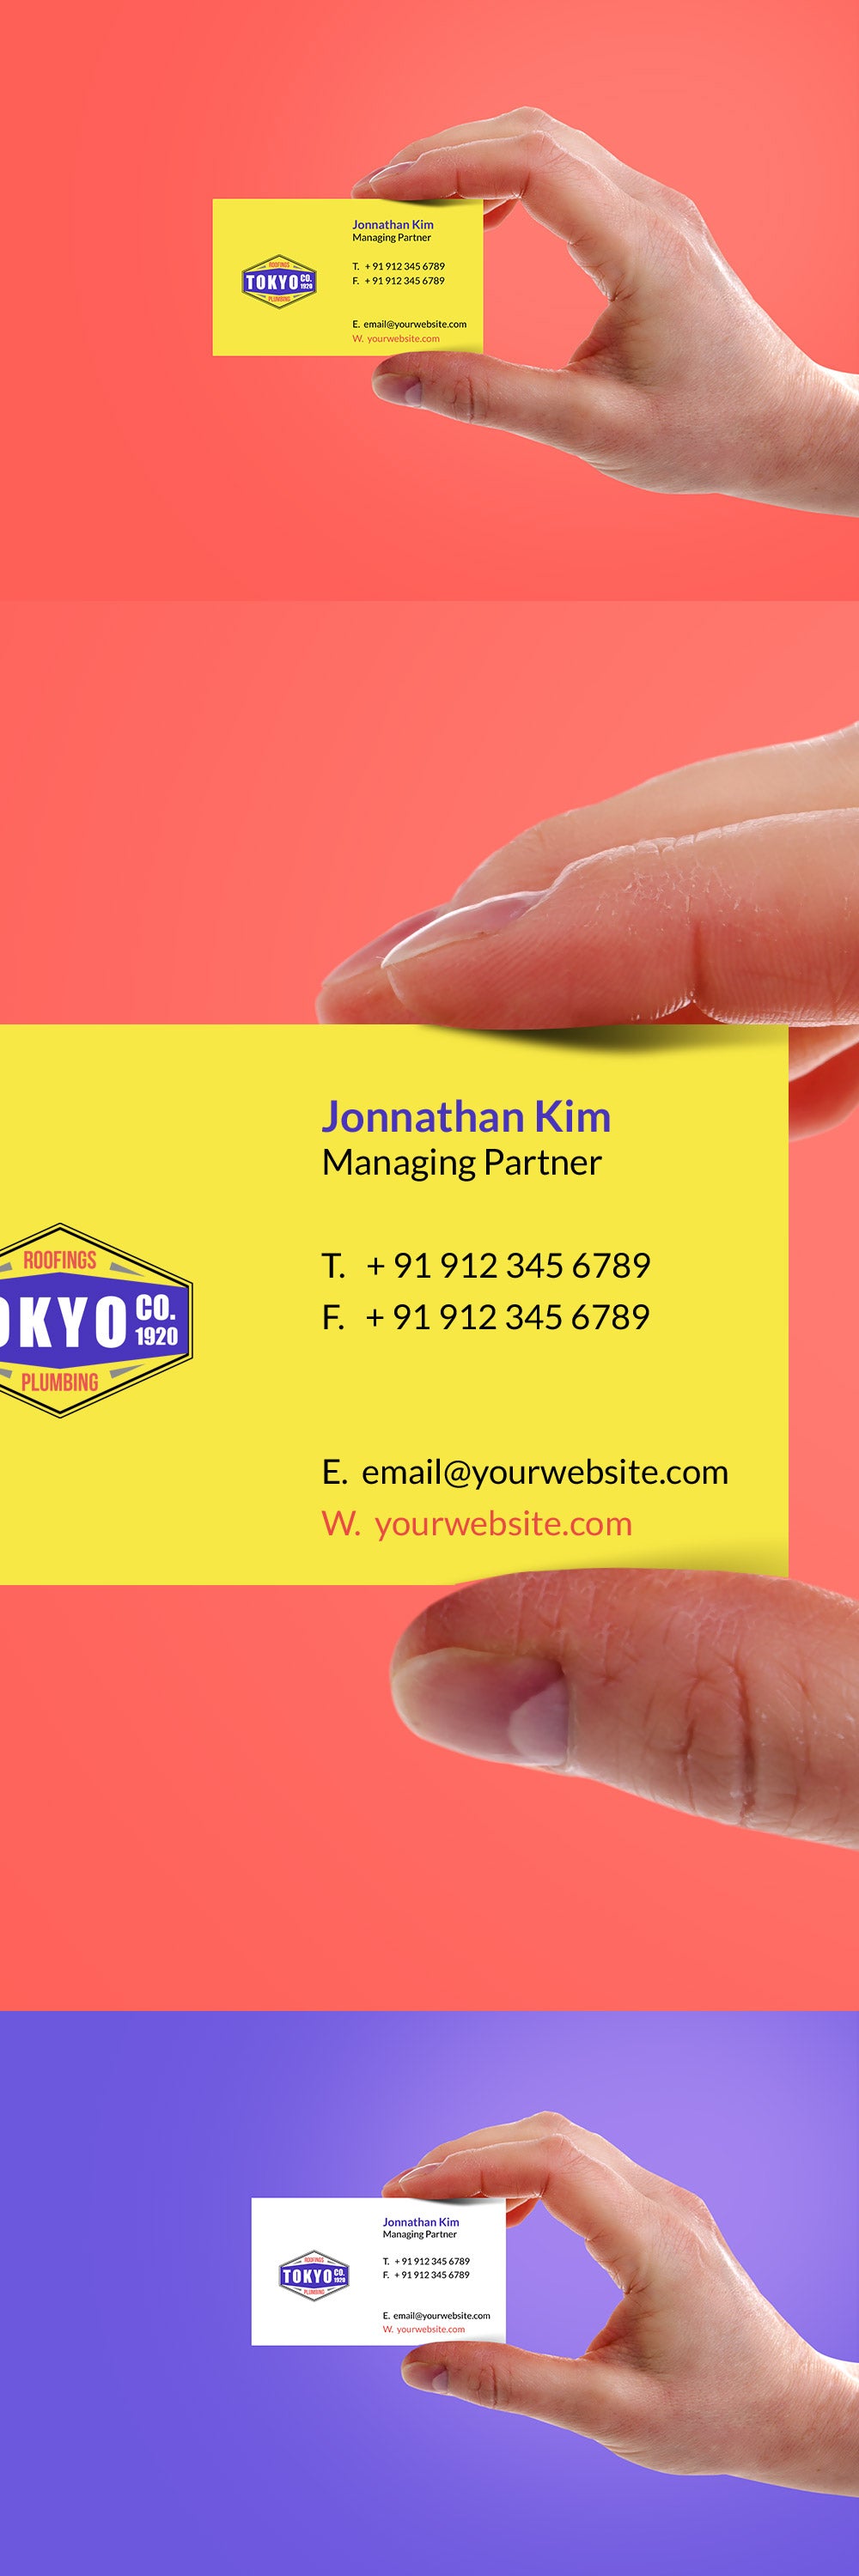 Download Free Hand Holding Yellow Business Card Mockup Psd Creativebooster